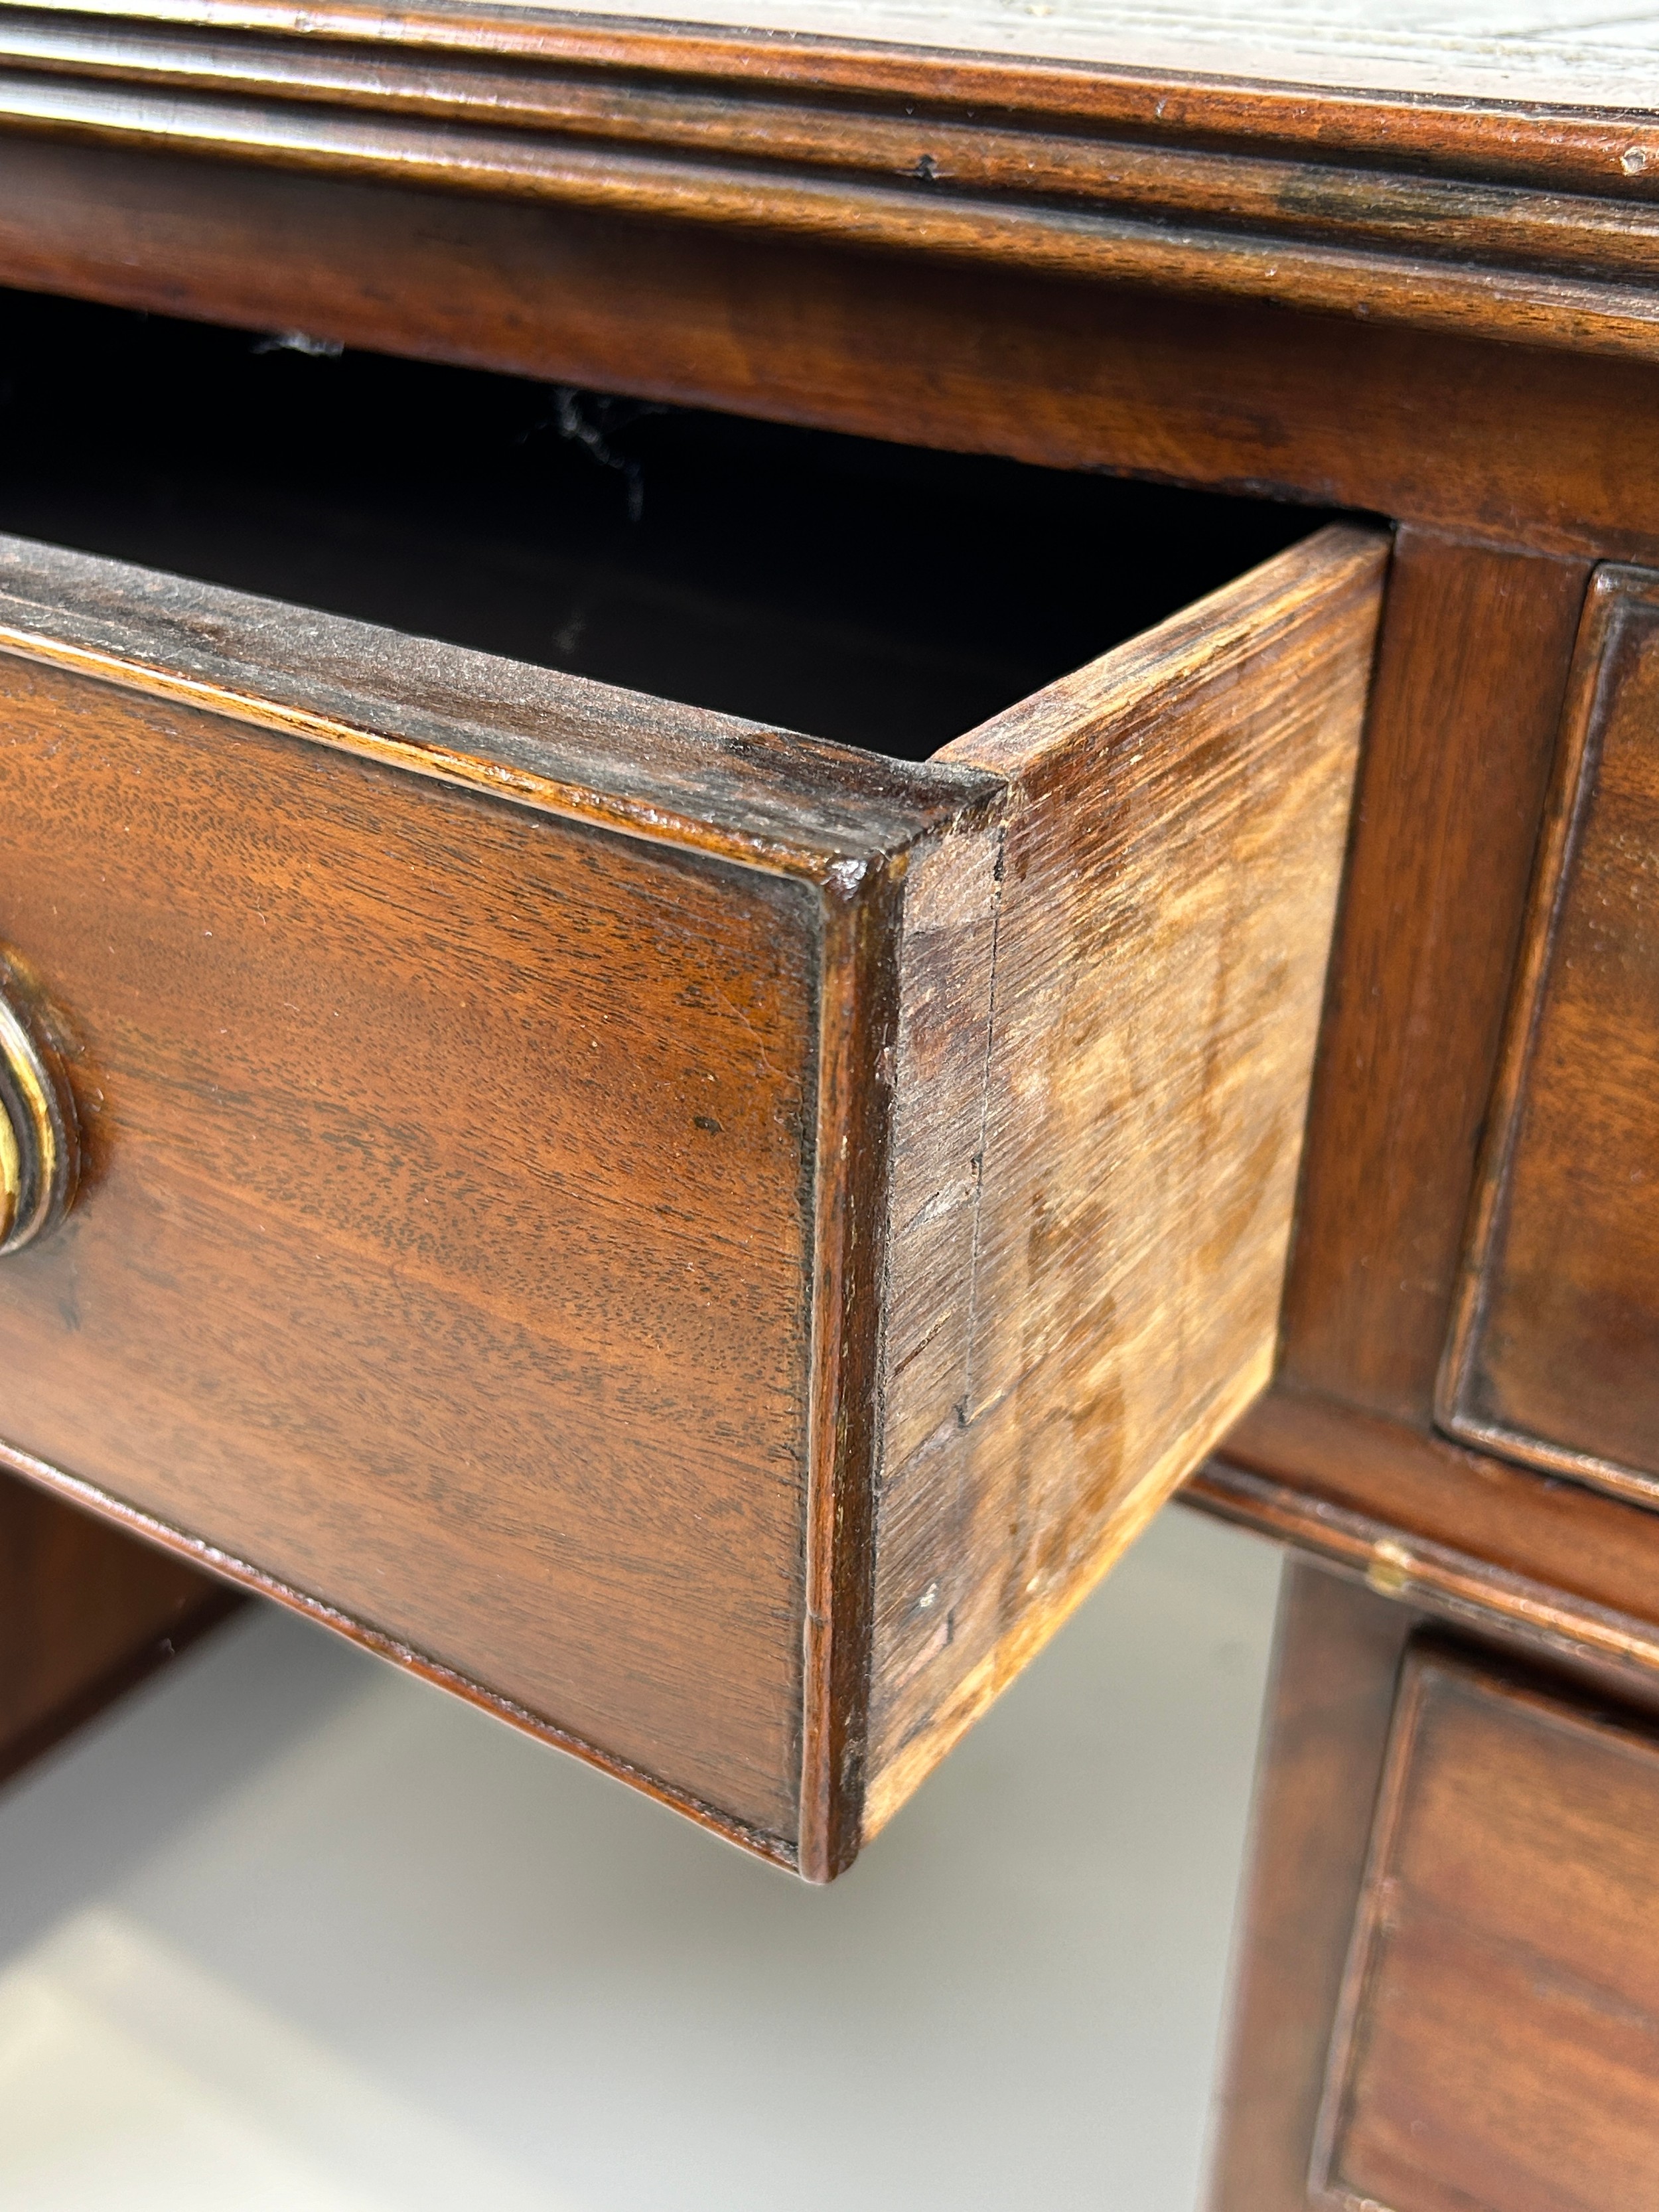 AN EARLY 19TH CENTRAL PARTNERS DESK, Two pedestals, each with ten drawers with brass handles. - Image 8 of 12